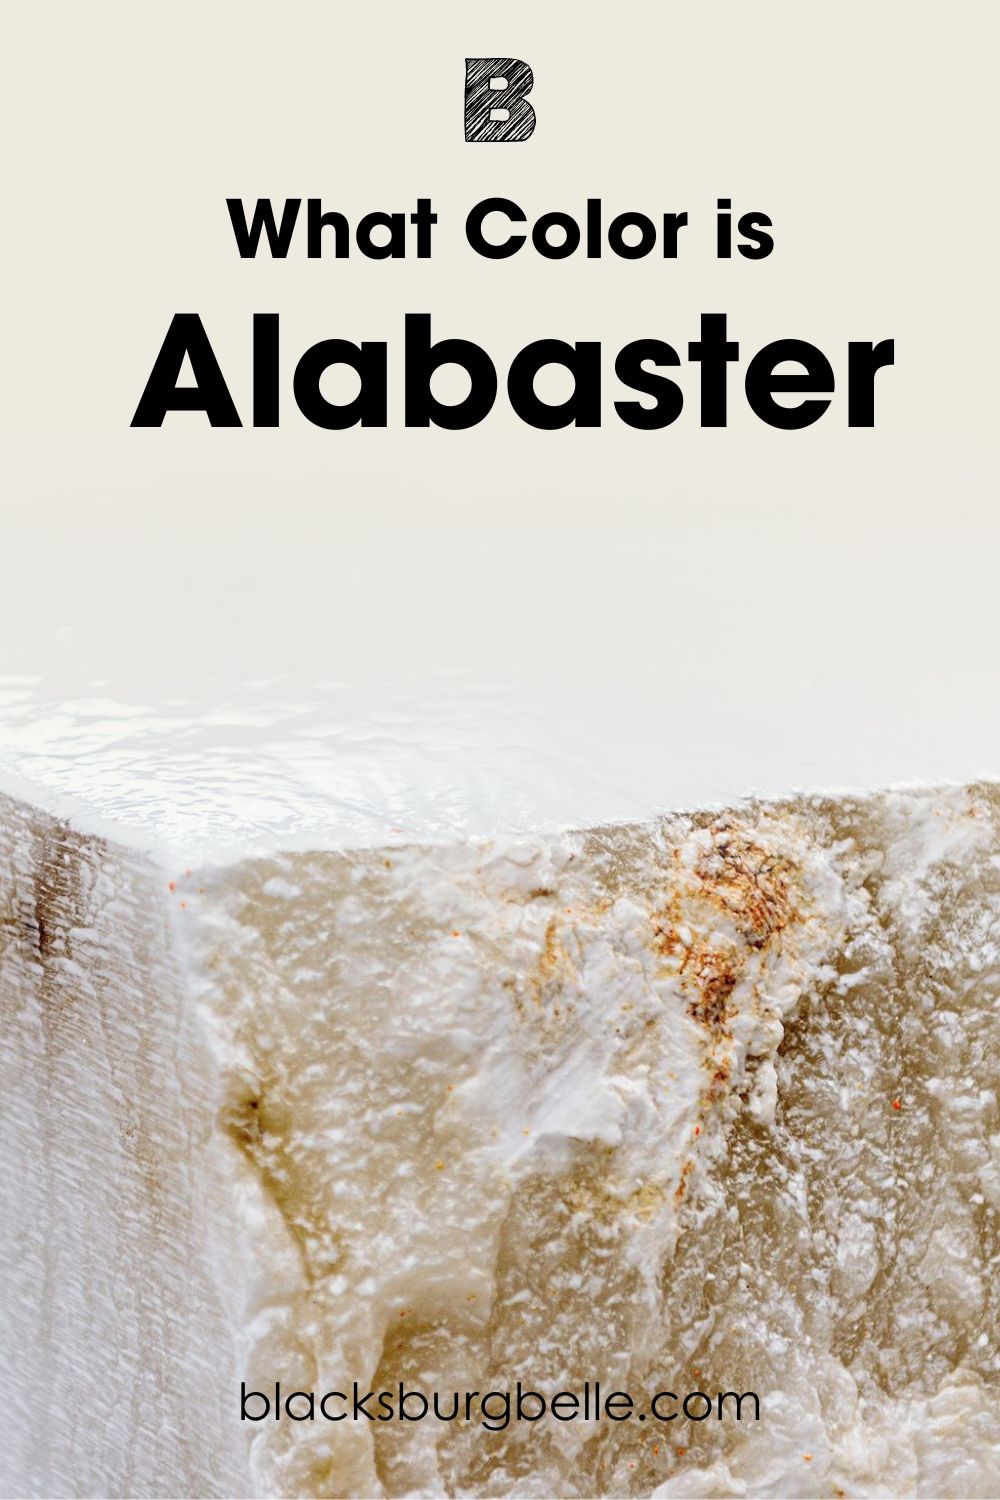 What Color is Alabaster